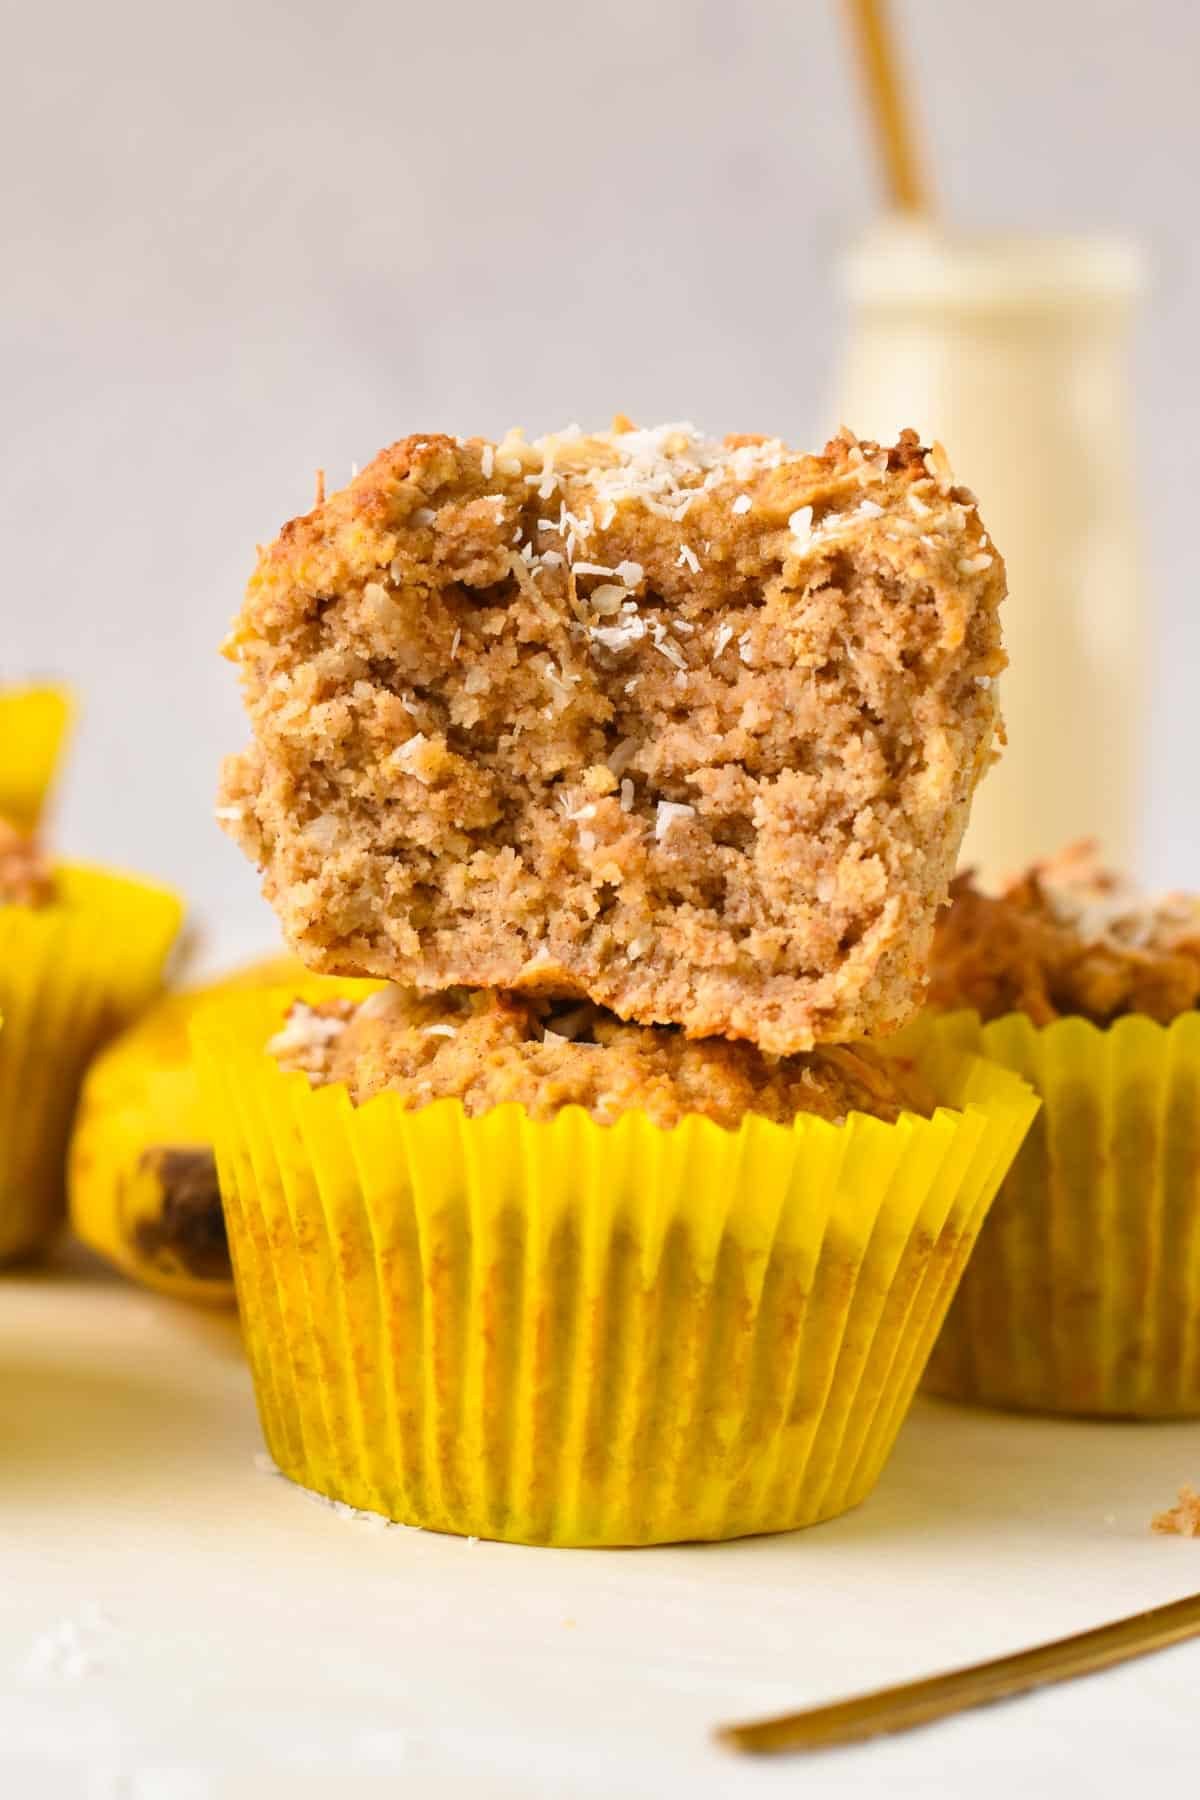 A stack of two coconut flour banana muffins with the one one top half bitten showing the light, fluffy muffin crumbs.